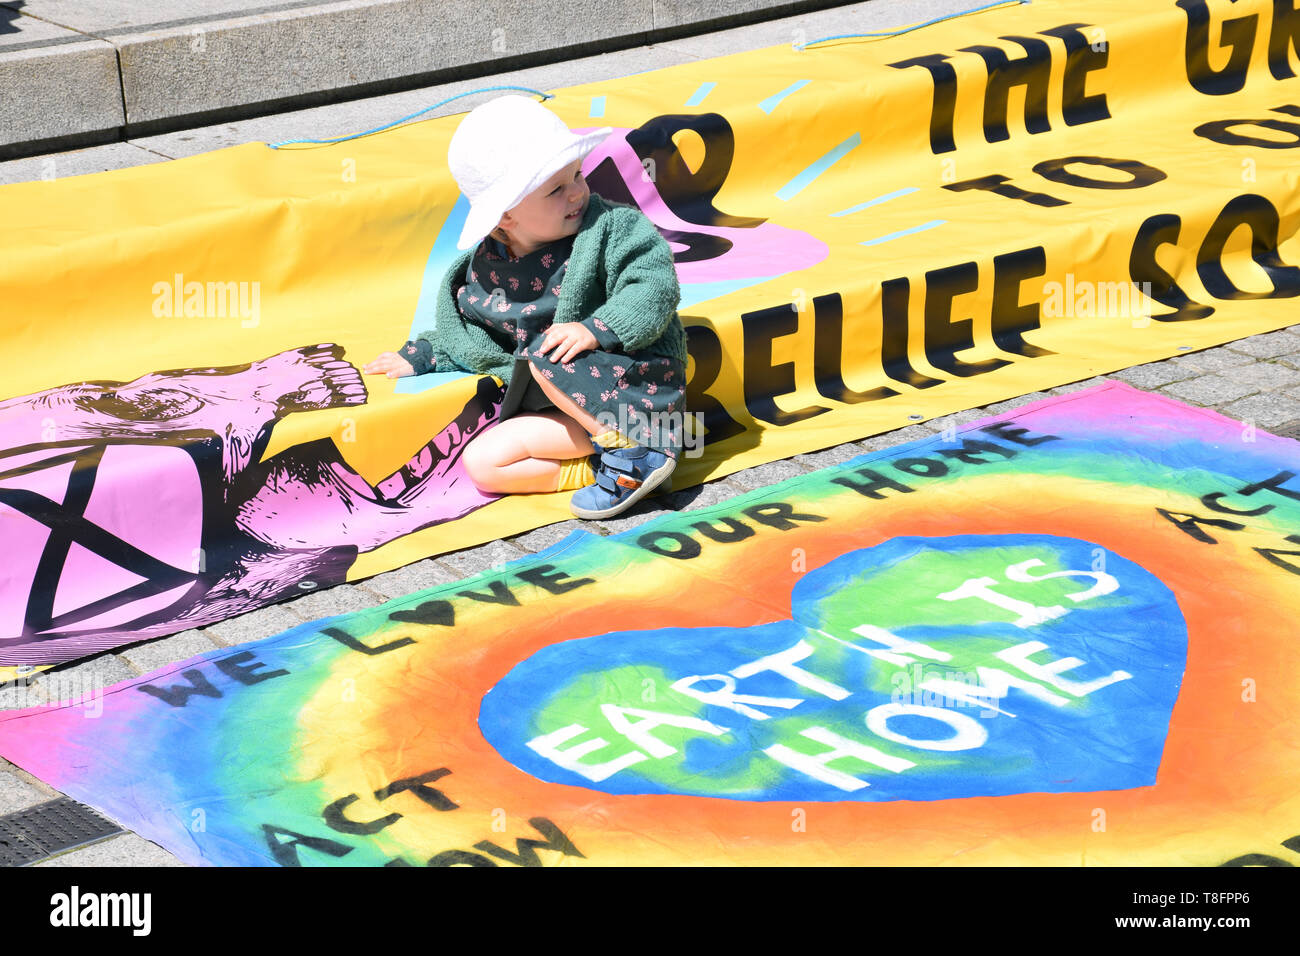 Extinction Rebellion climate change protest in Norwich, UK 12 May 2019 Stock Photo